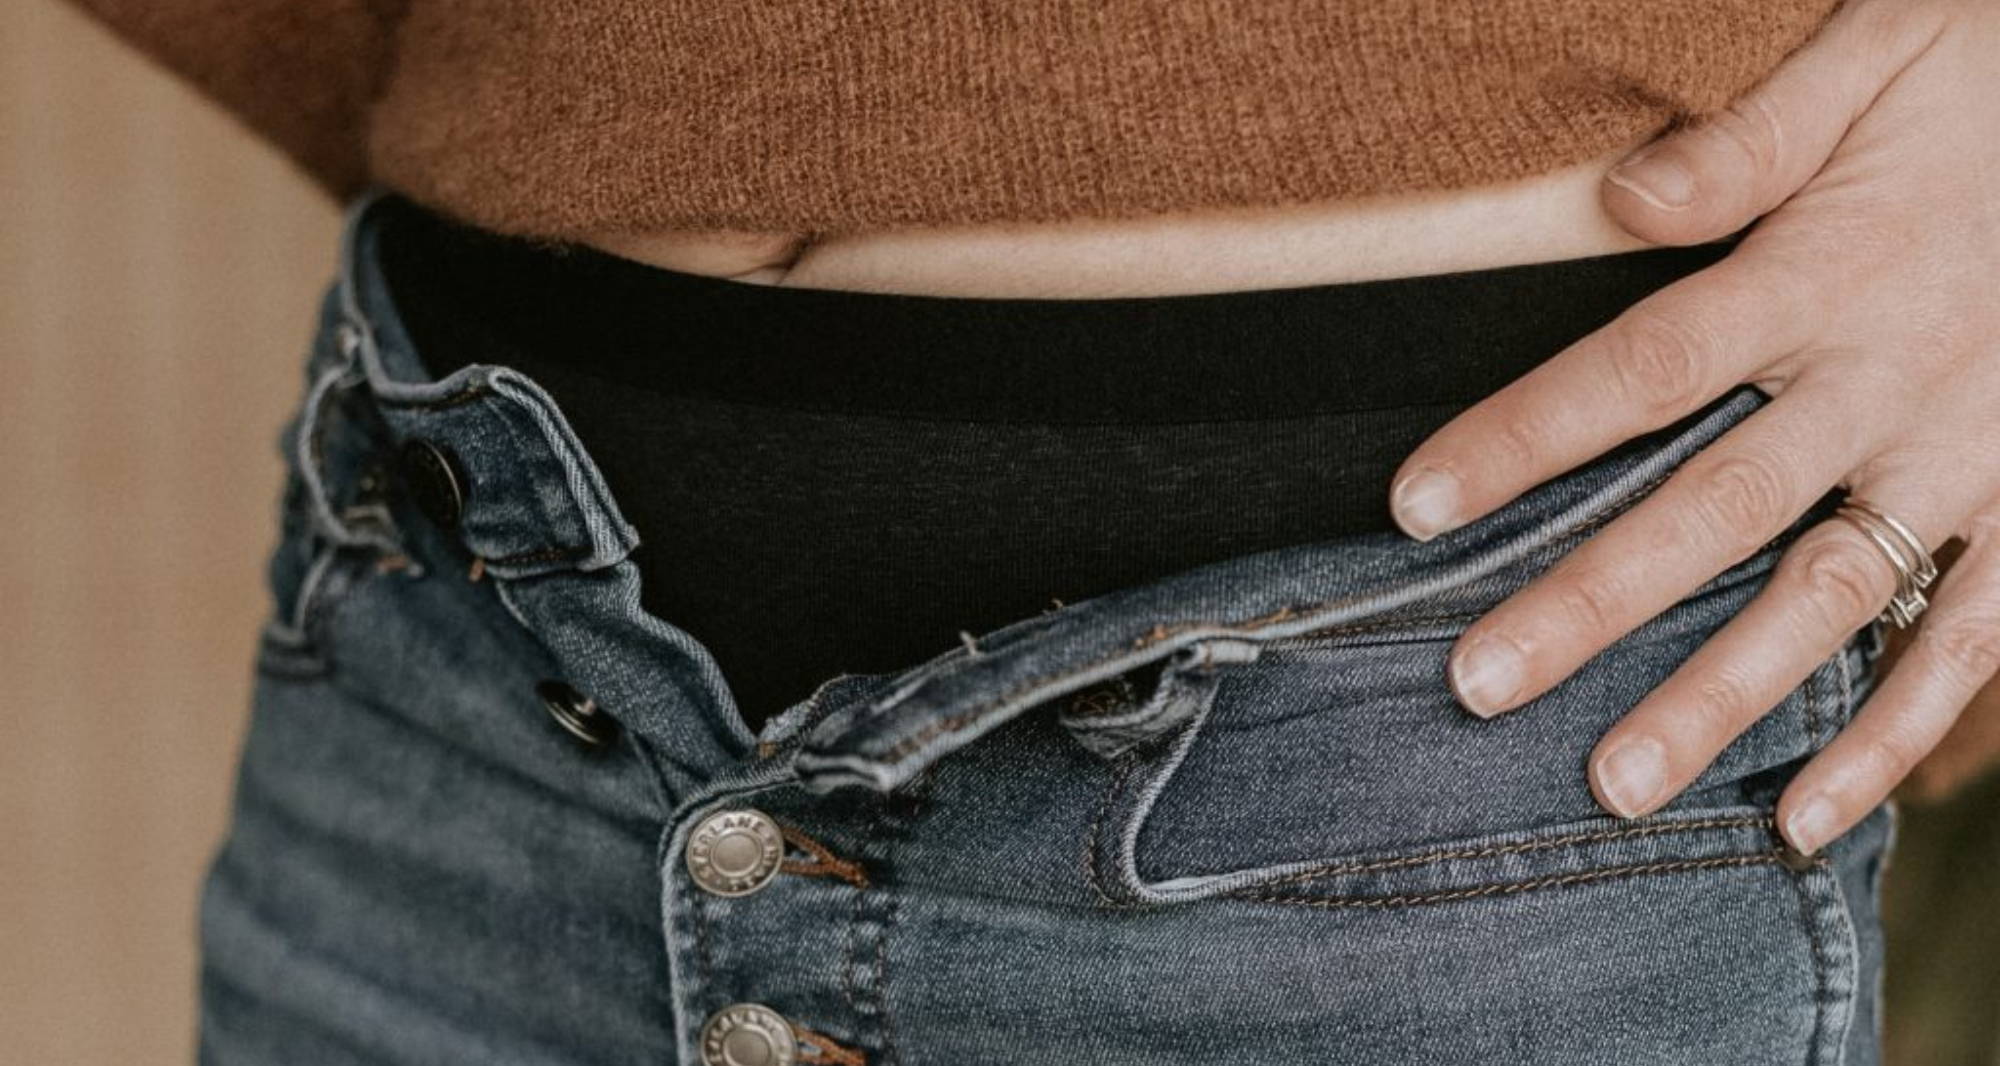 A woman with her left hand on her hip, and jeans buttons open showing her breathable underwear